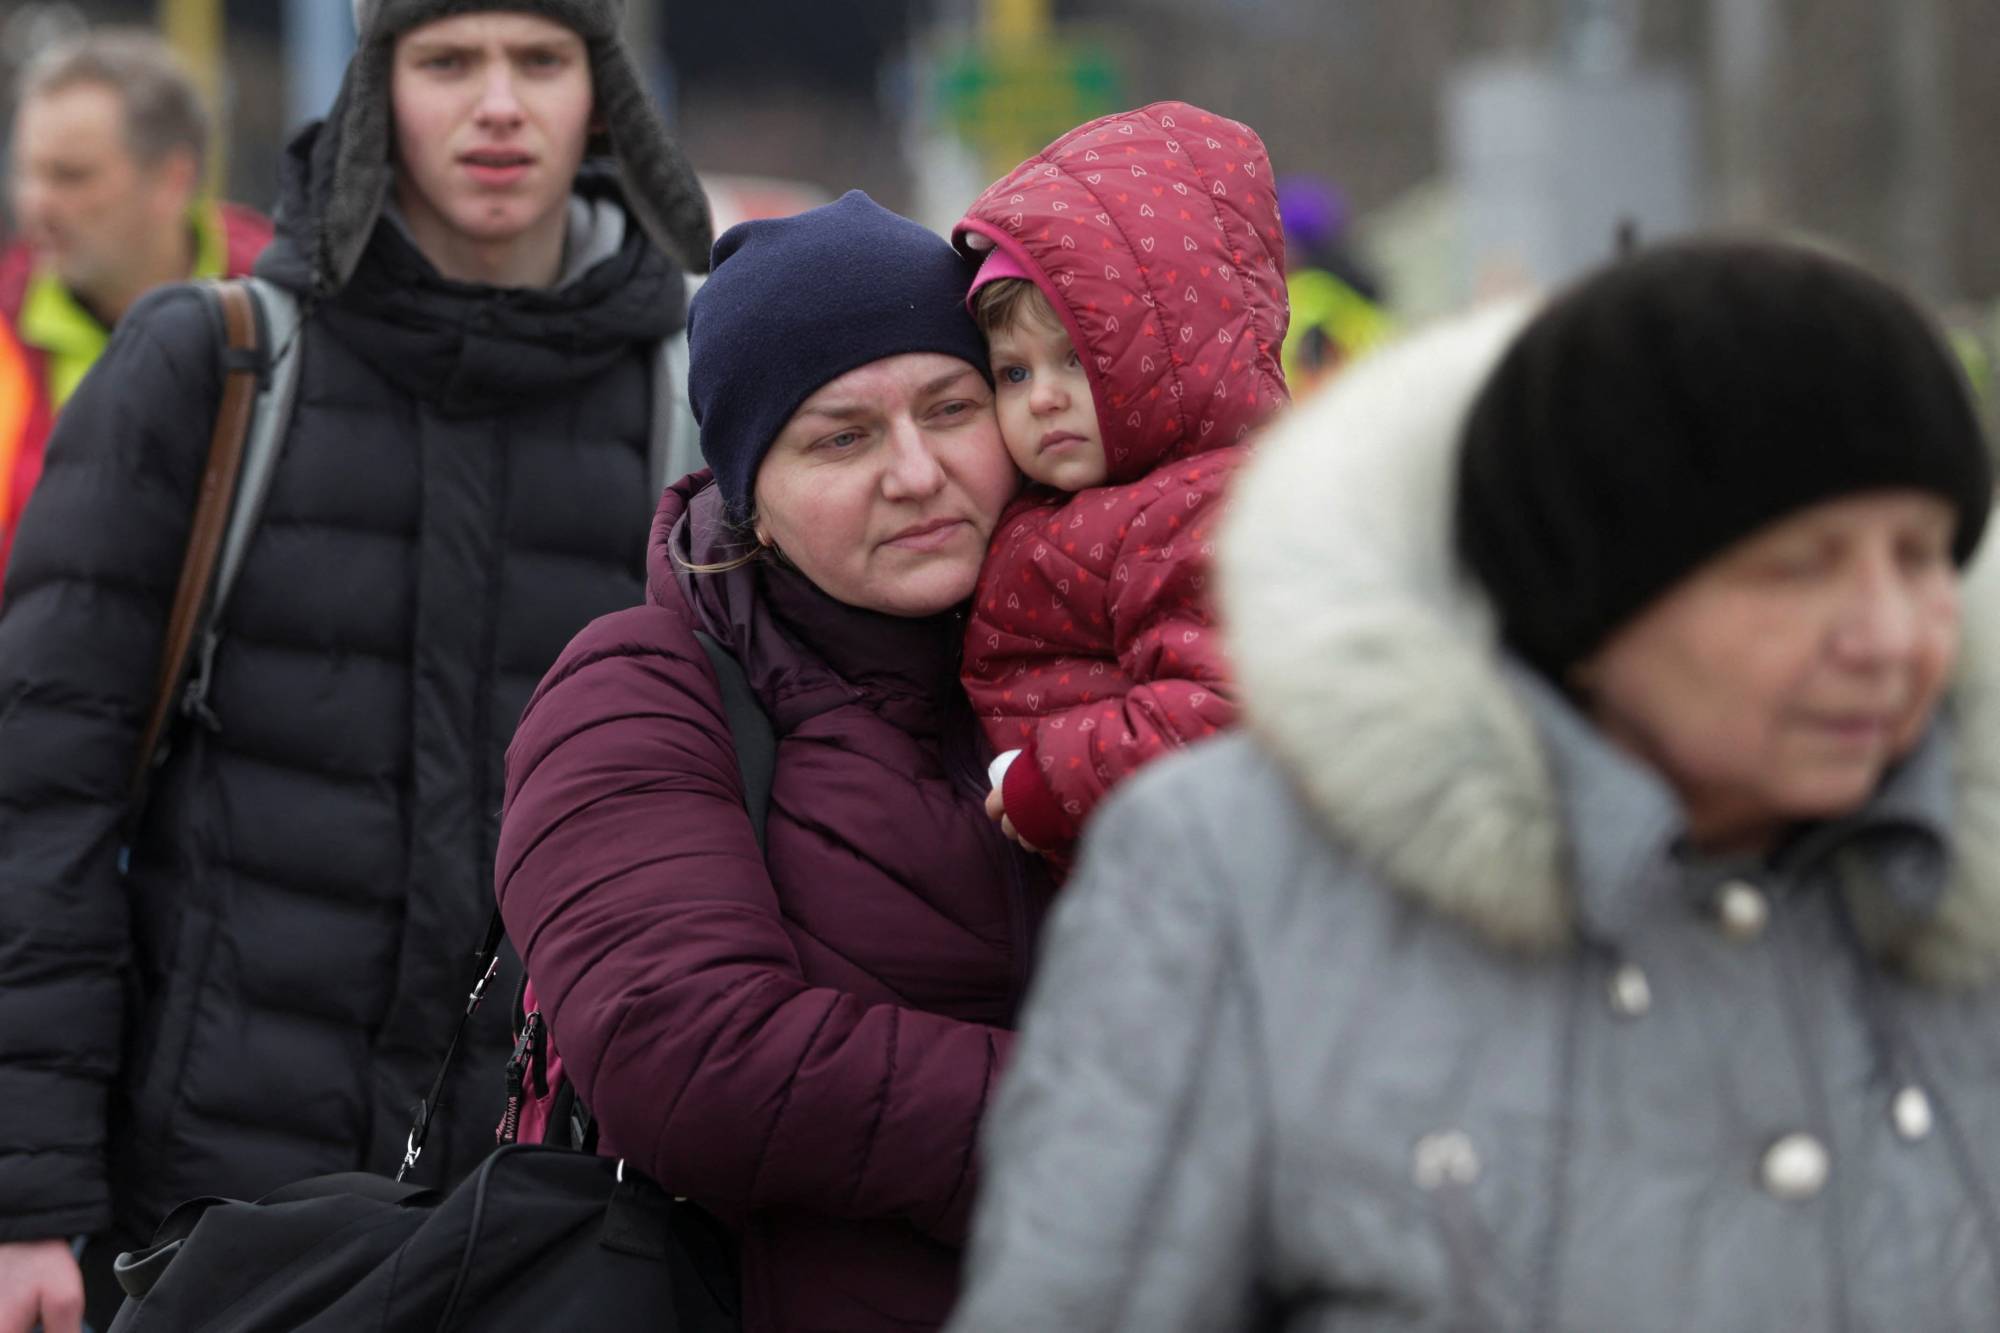 Refugees wait at the Ukrainian-Slovakian border after fleeing Russia's invasion of Ukraine, in Vysne Nemecke, Slovakia, on March 5.  | REUTERS